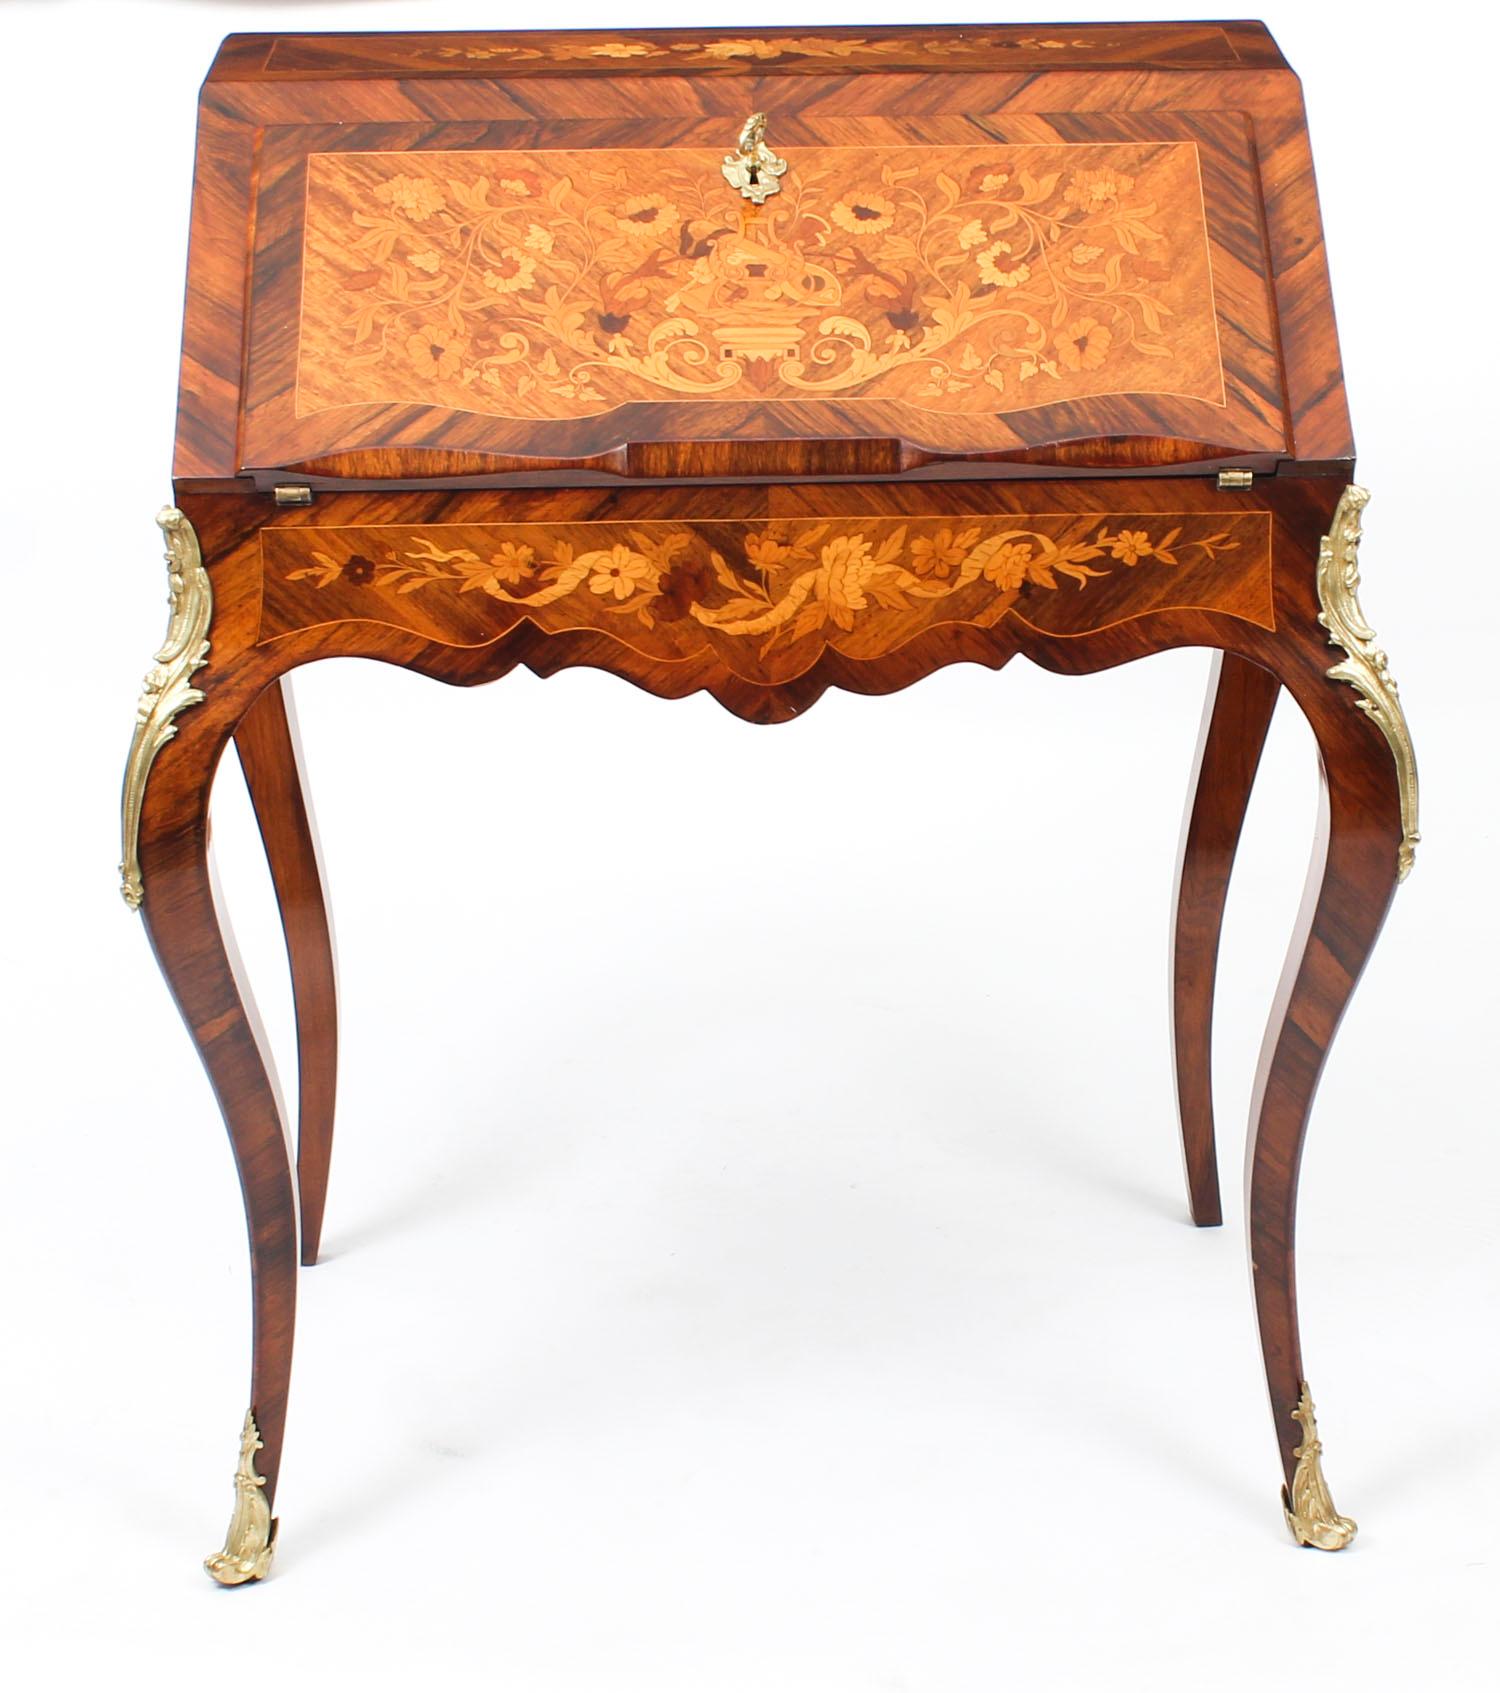 This is an elegant antique French Louis Revival ormolu-mounted bureau de dame with a beautiful fitted interior, dating from circa 1860.

This magnificent piece is of the finest kingwood and walnut, it features profuse marquetry decoration and